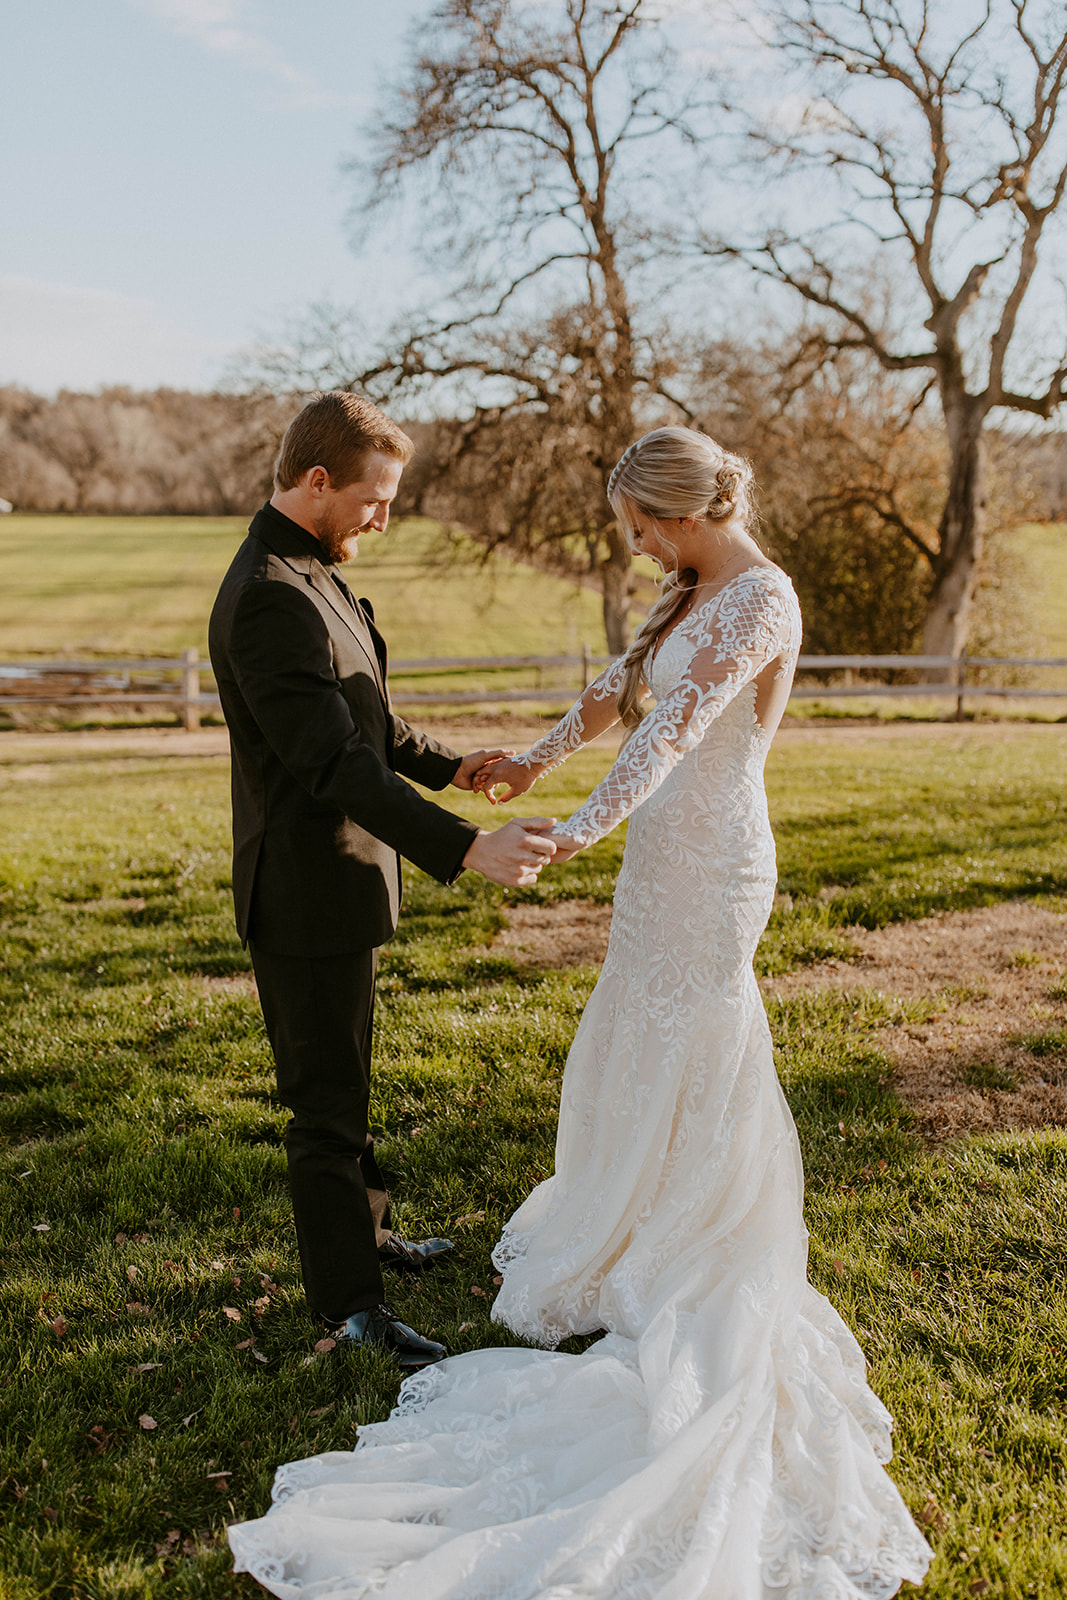 first look during a western winter wedding in california. the bride and groom see each other for the first time on their wedding day. photo by codi baer photography
